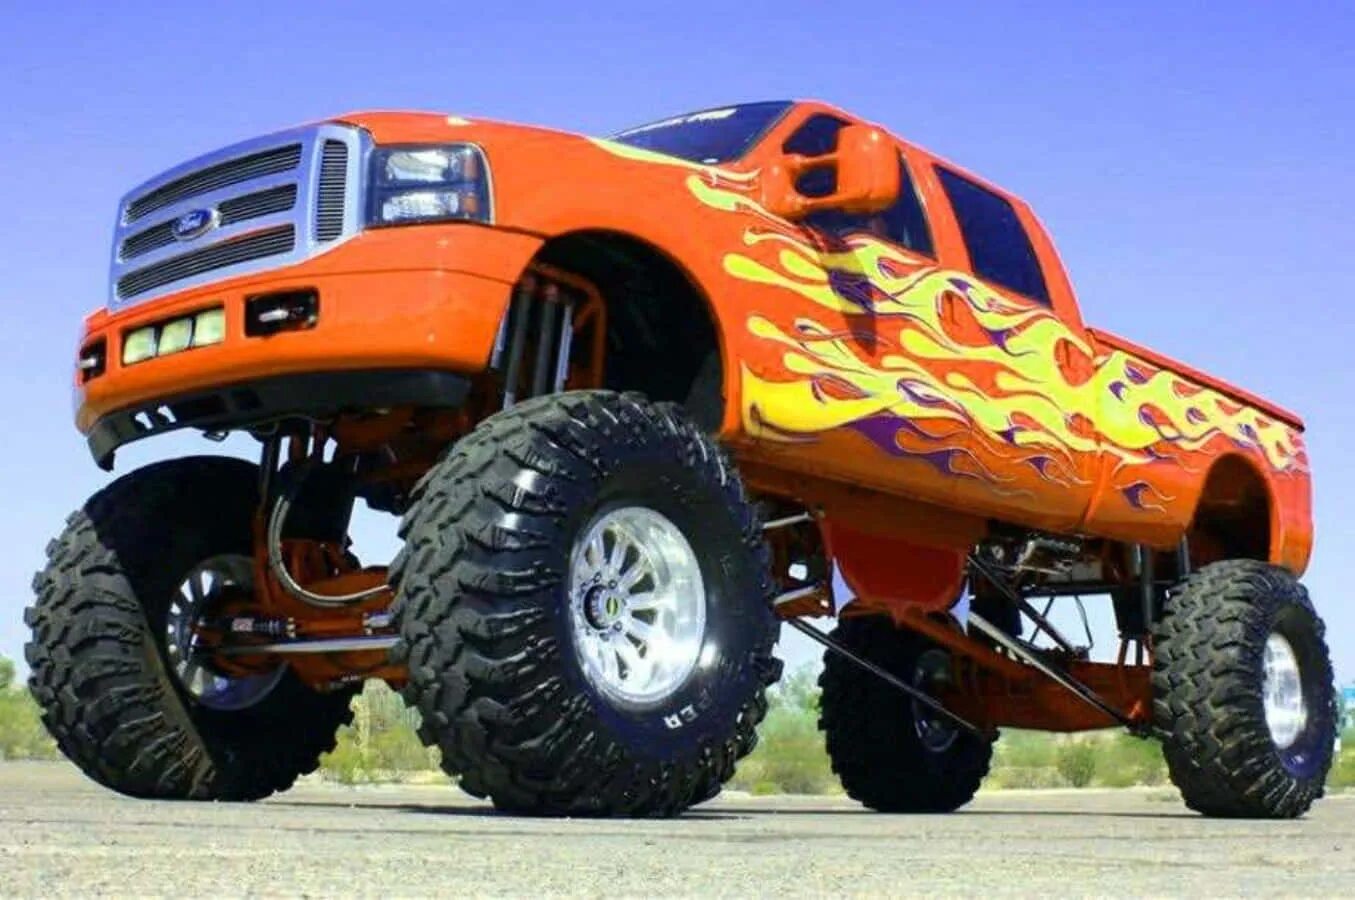 Big best cars. Ford f350 Monster Truck. Форд 750 монстр трак. Форд 950 монстр трак. Форд ф500 бигфут.